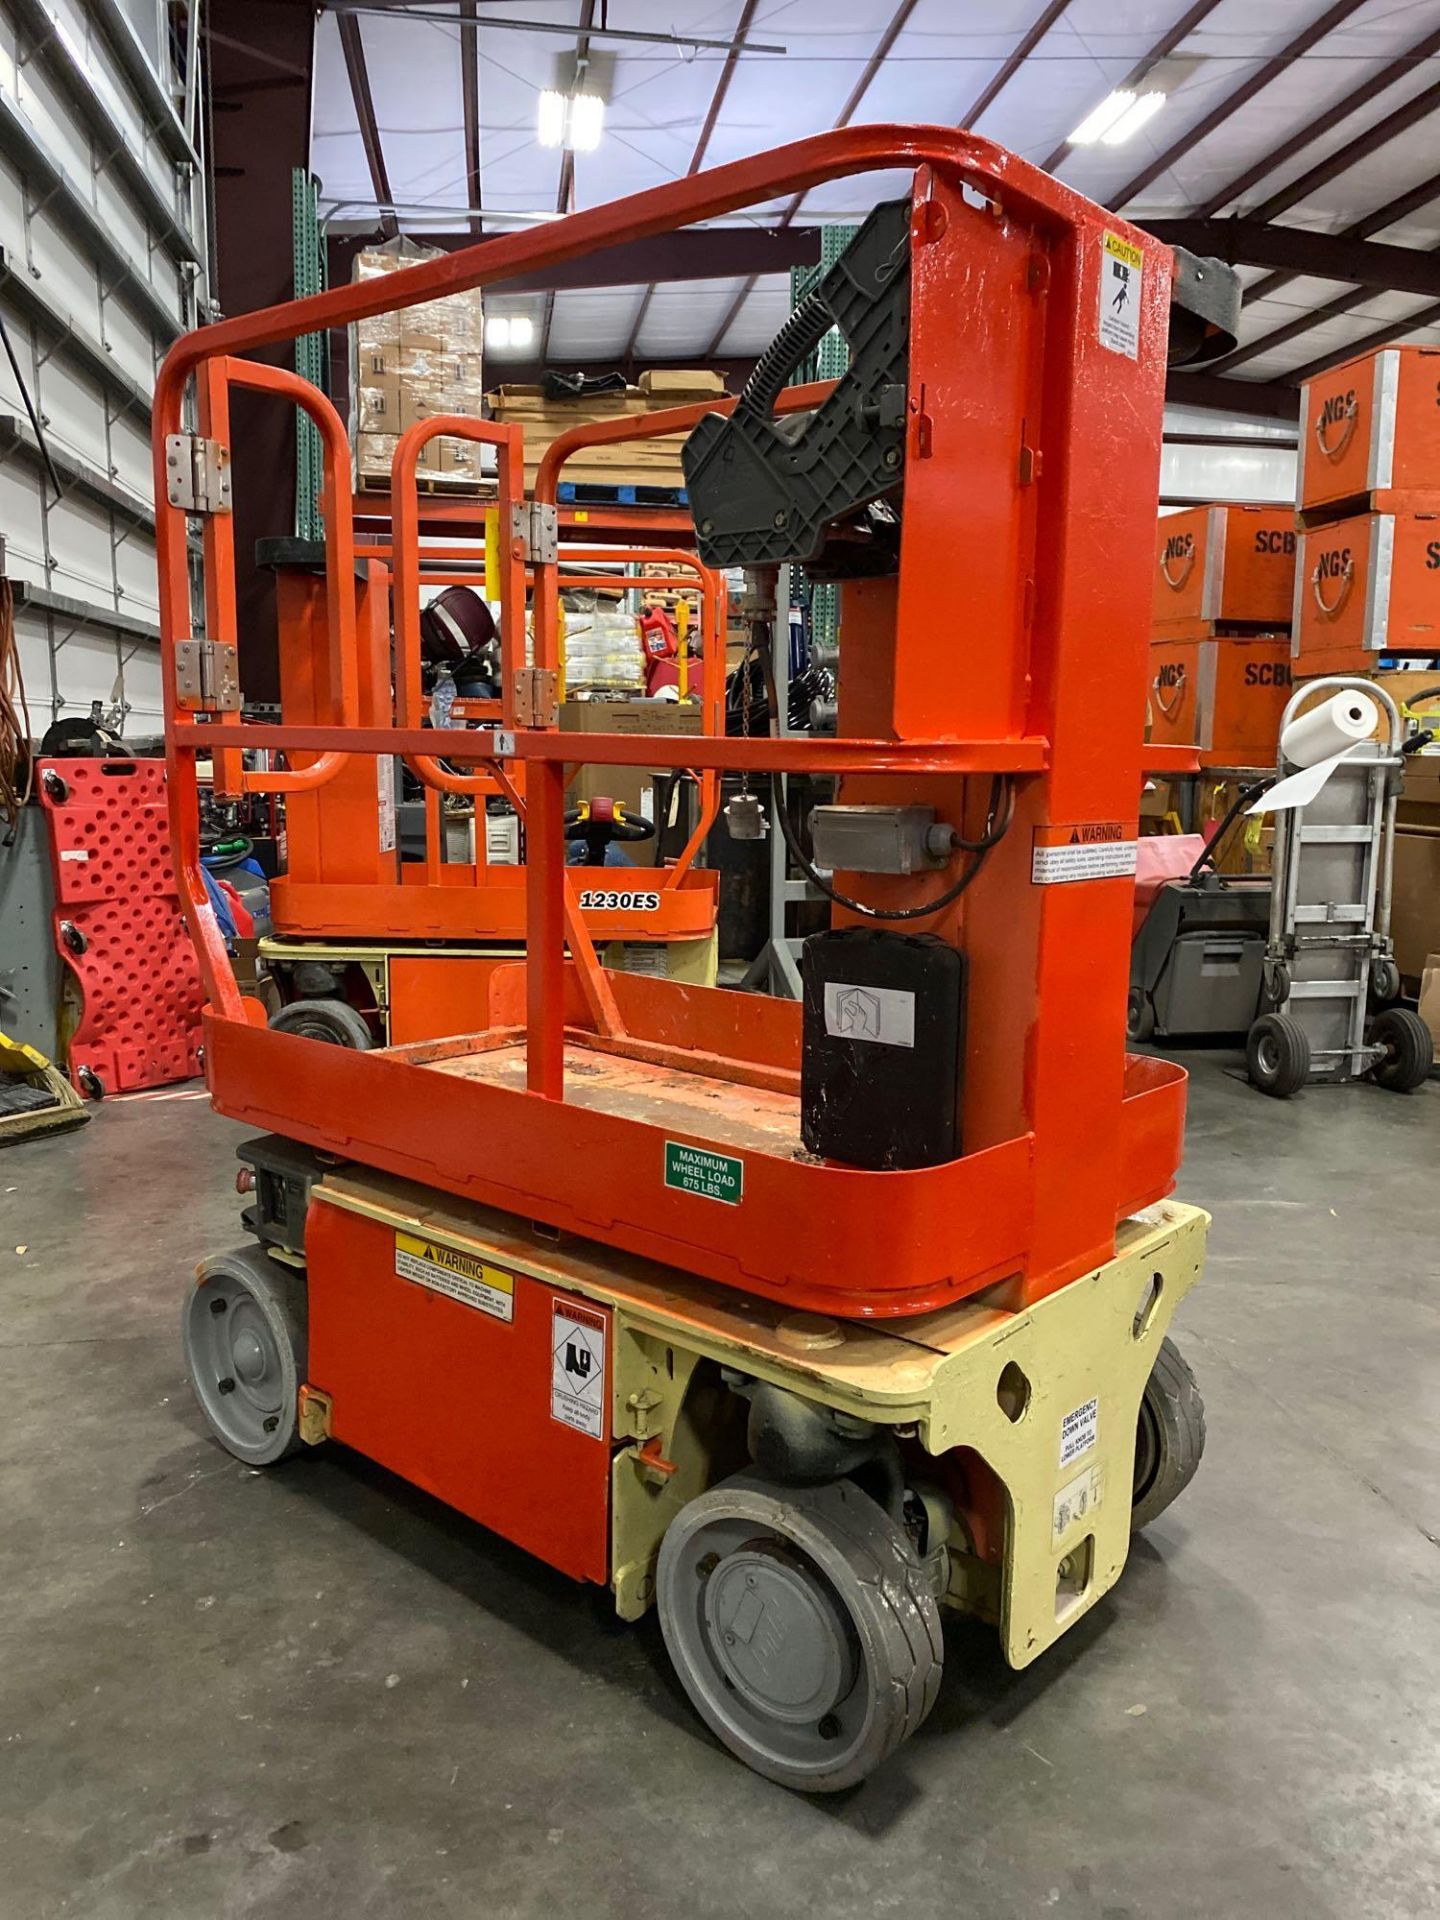 JLG 1230 ES ELECTRIC MAN LIFT, SELF PROPELLED, BUILT IN BATTERY CHARGER, 12' PLATFORM HEIGHT, APPROX - Image 4 of 6